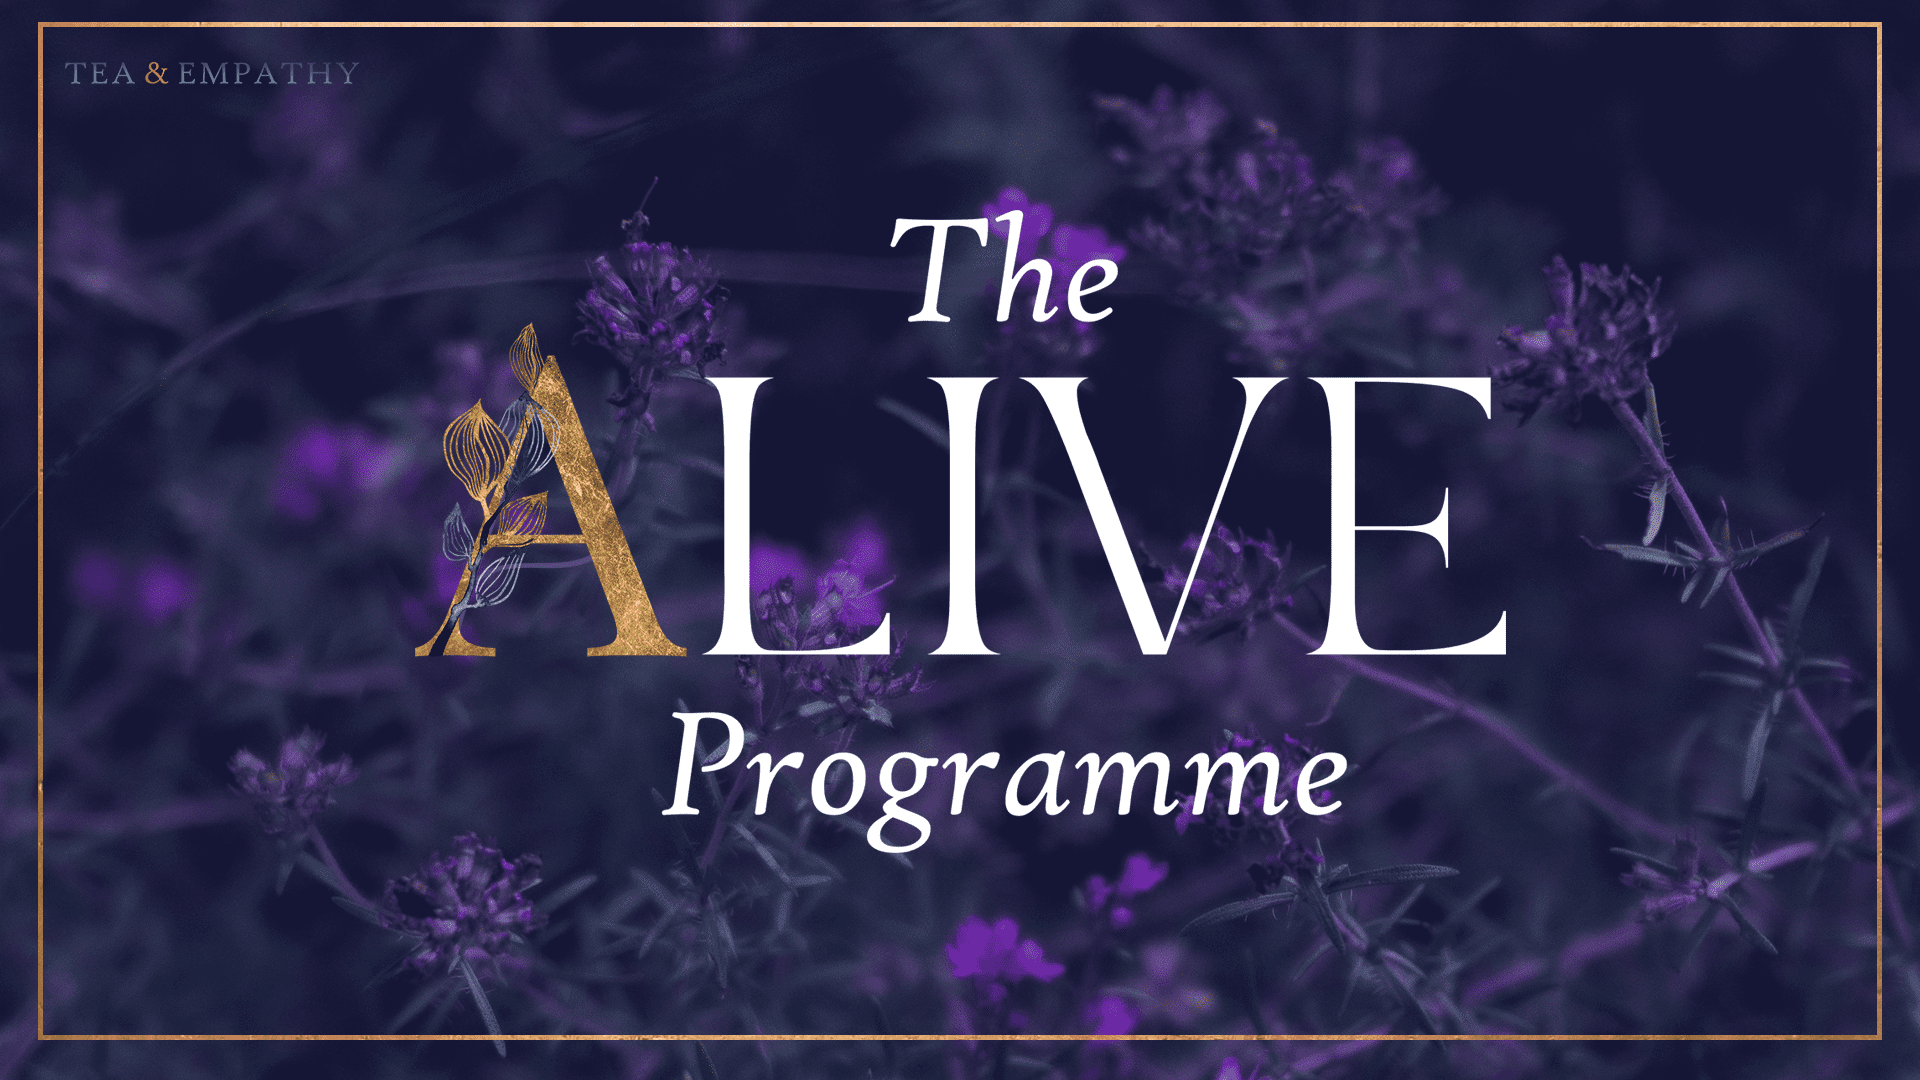 The Alive Programme